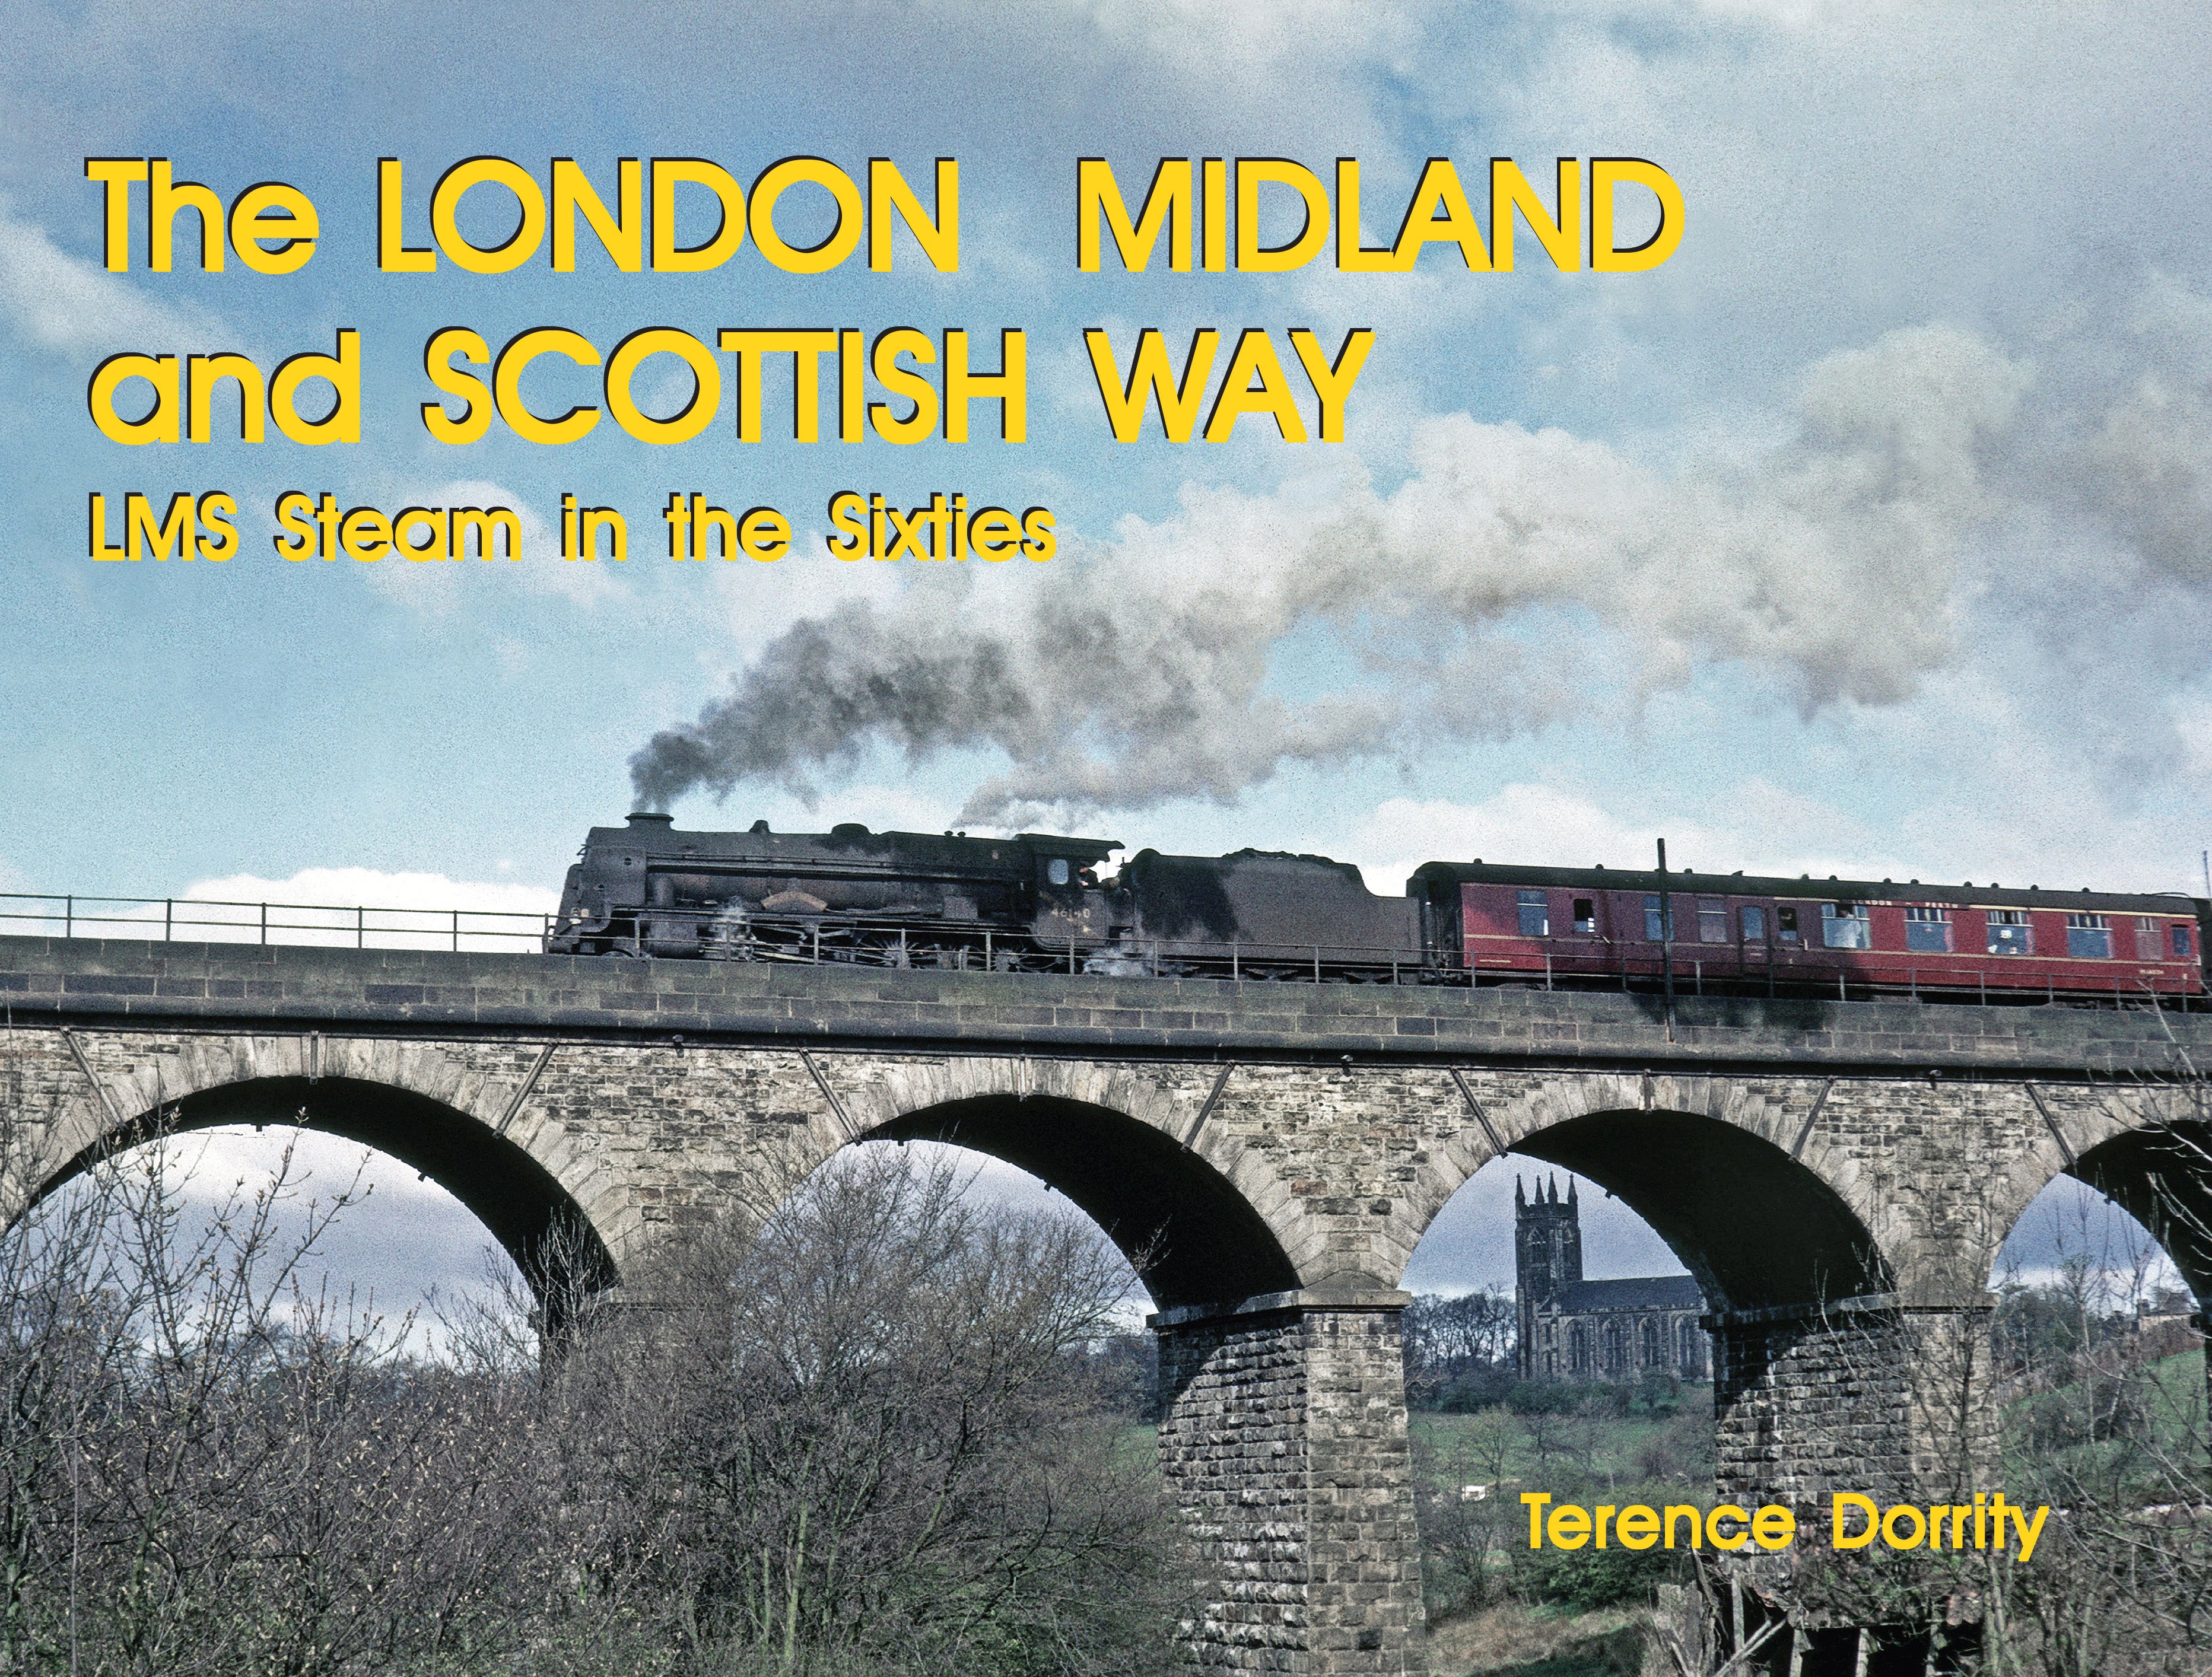 25% OFF RRP is £26.95 London Midland and Scottish Way - LMS Steam in the Sixties